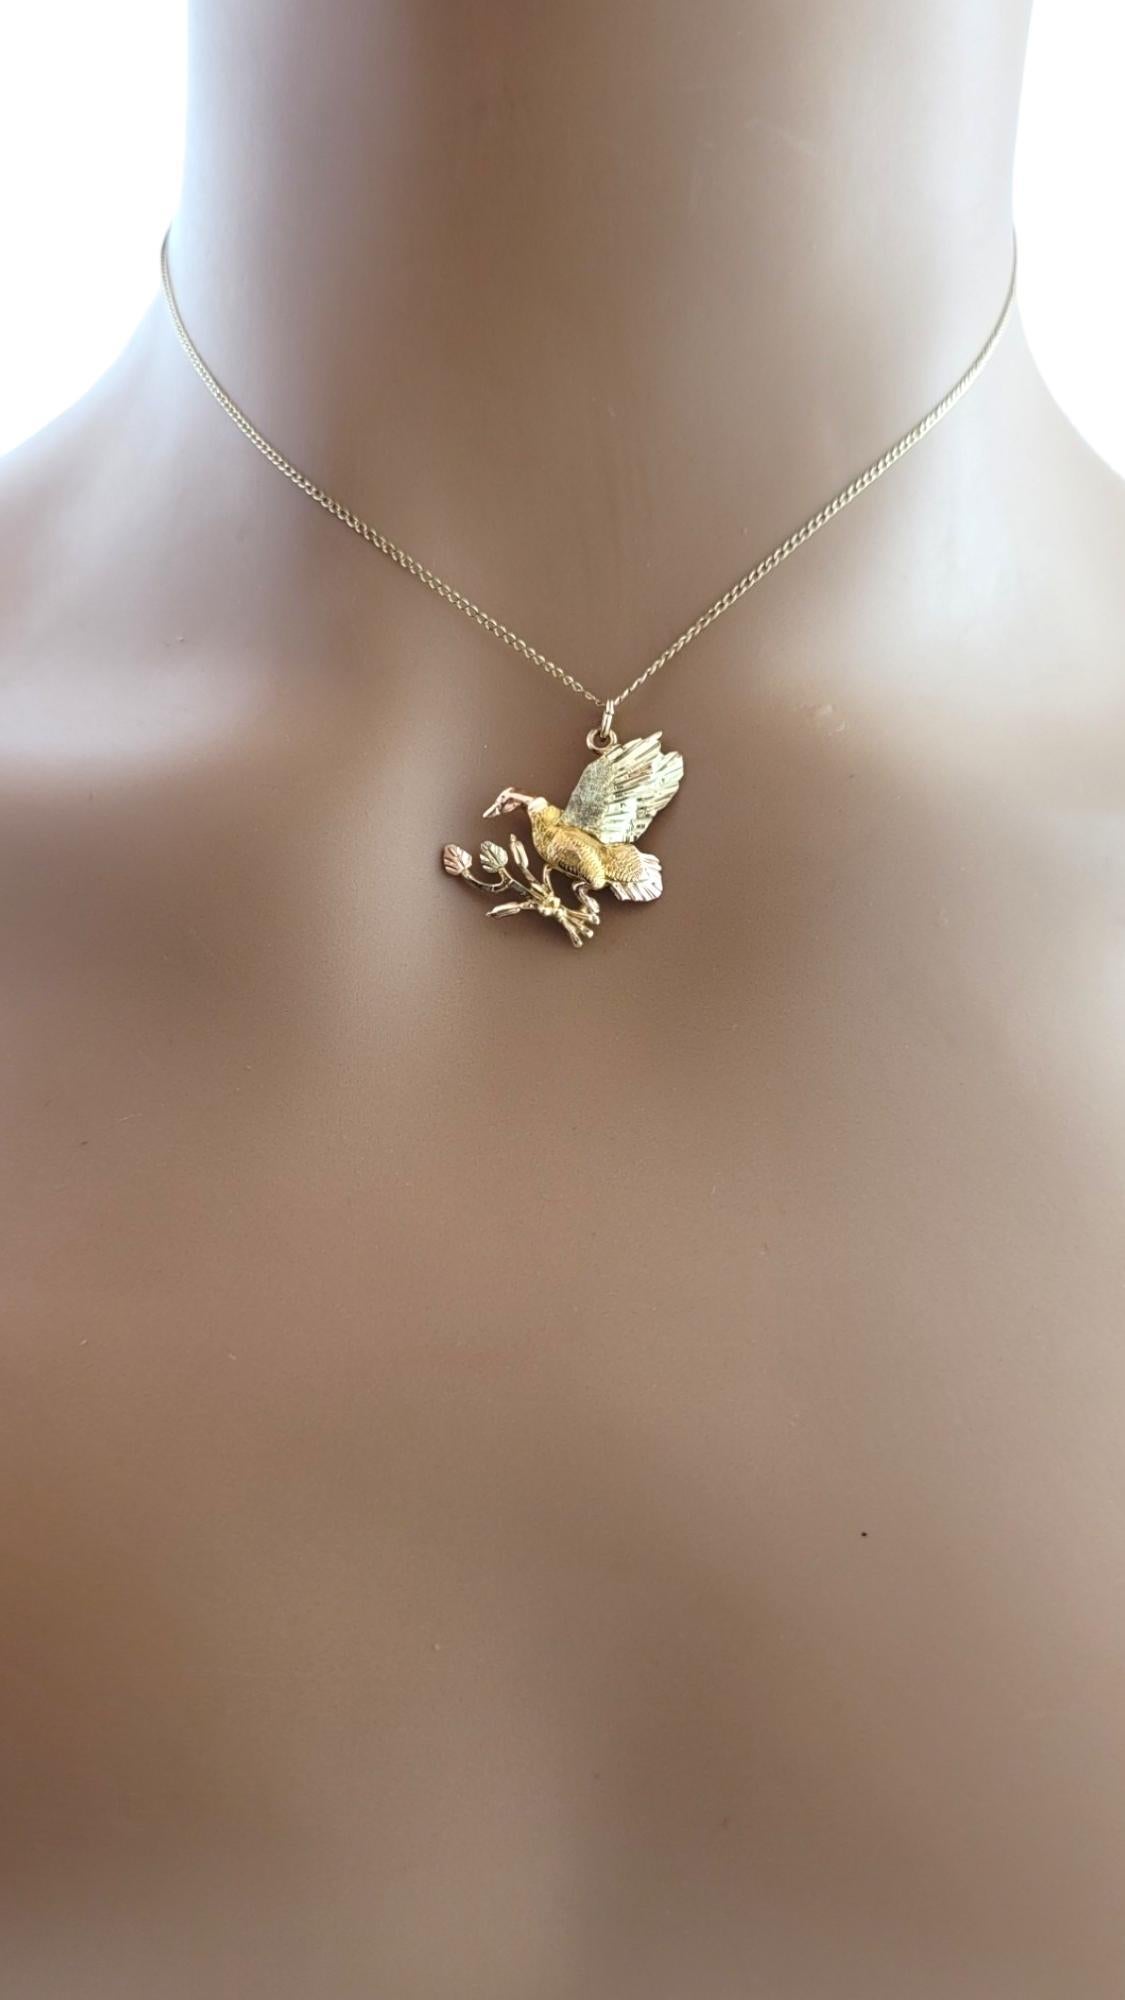 10K Yellow Gold Flying Bird Charm #16230 For Sale 2